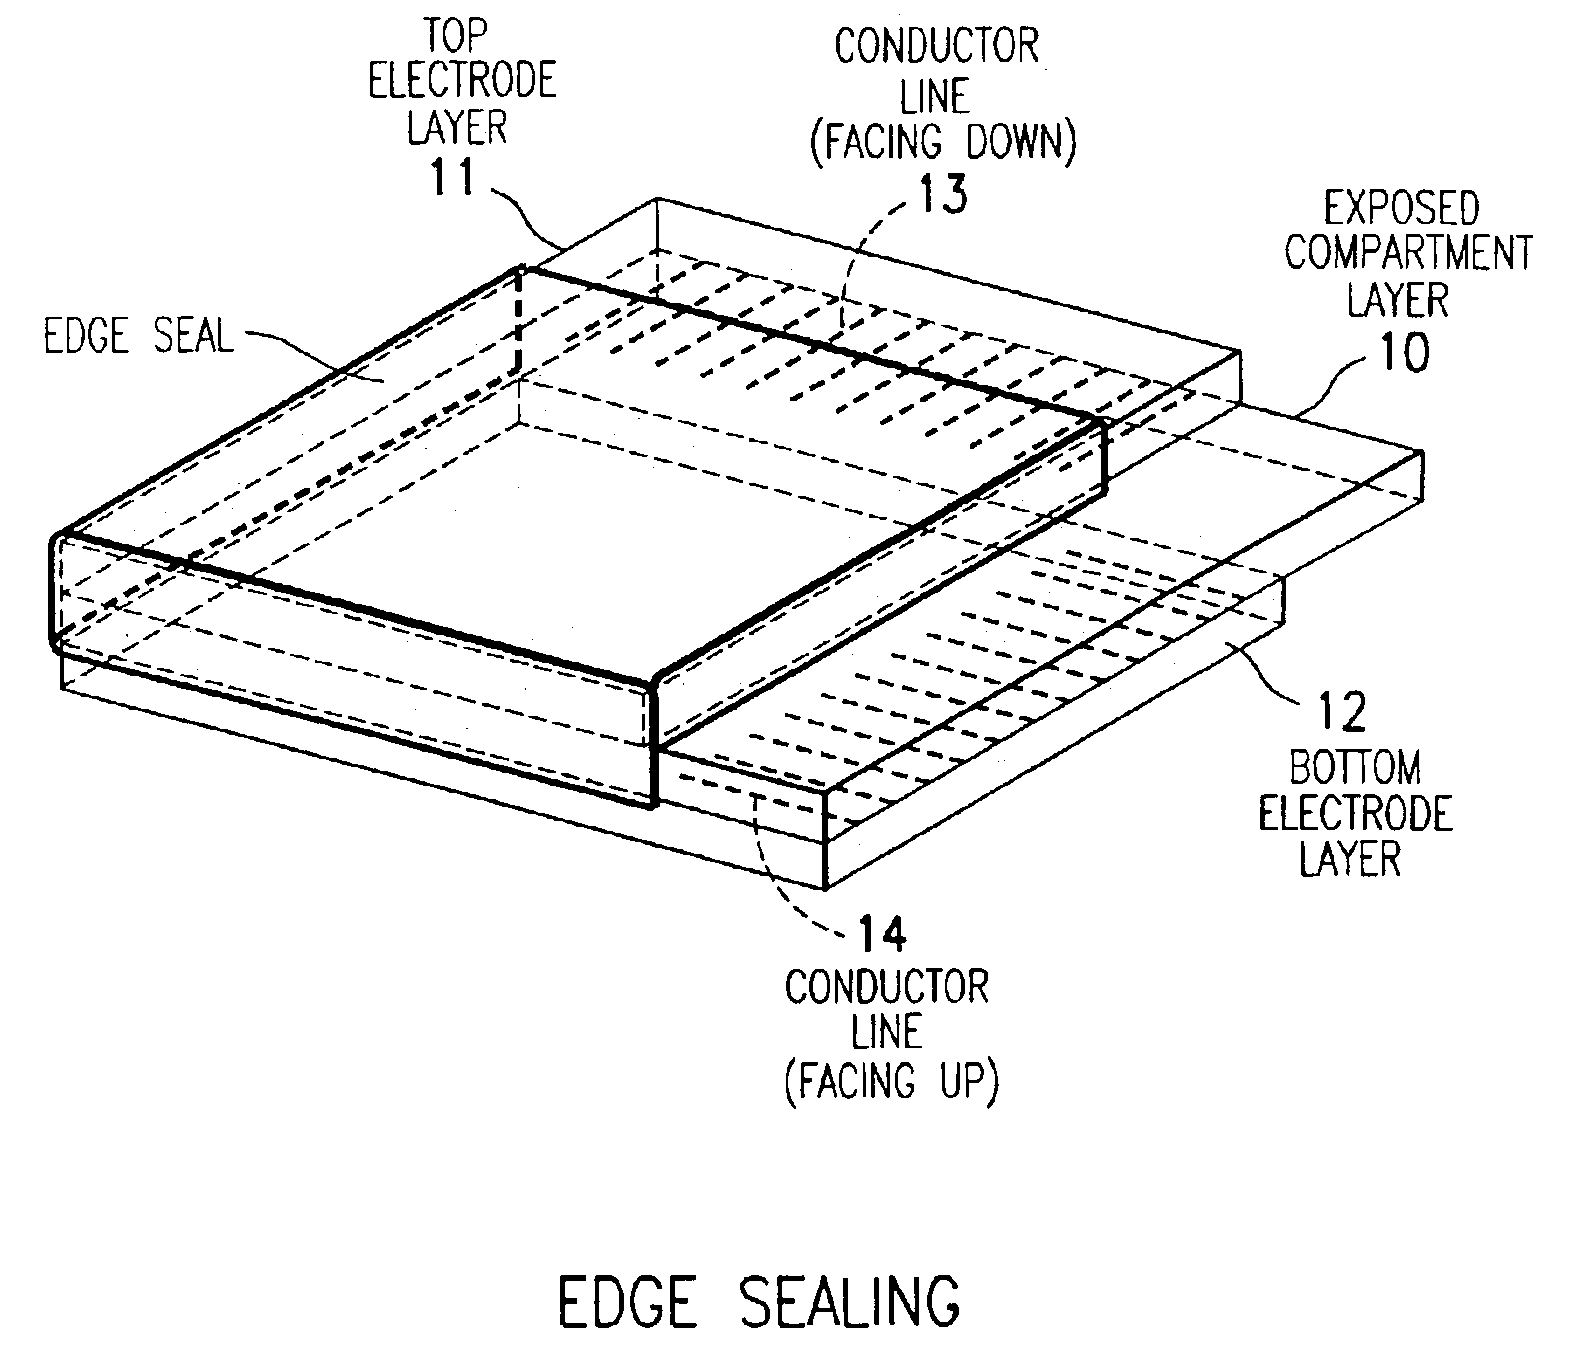 Compositions and processes for format flexible, roll-to-roll manufacturing of electrophoretic displays